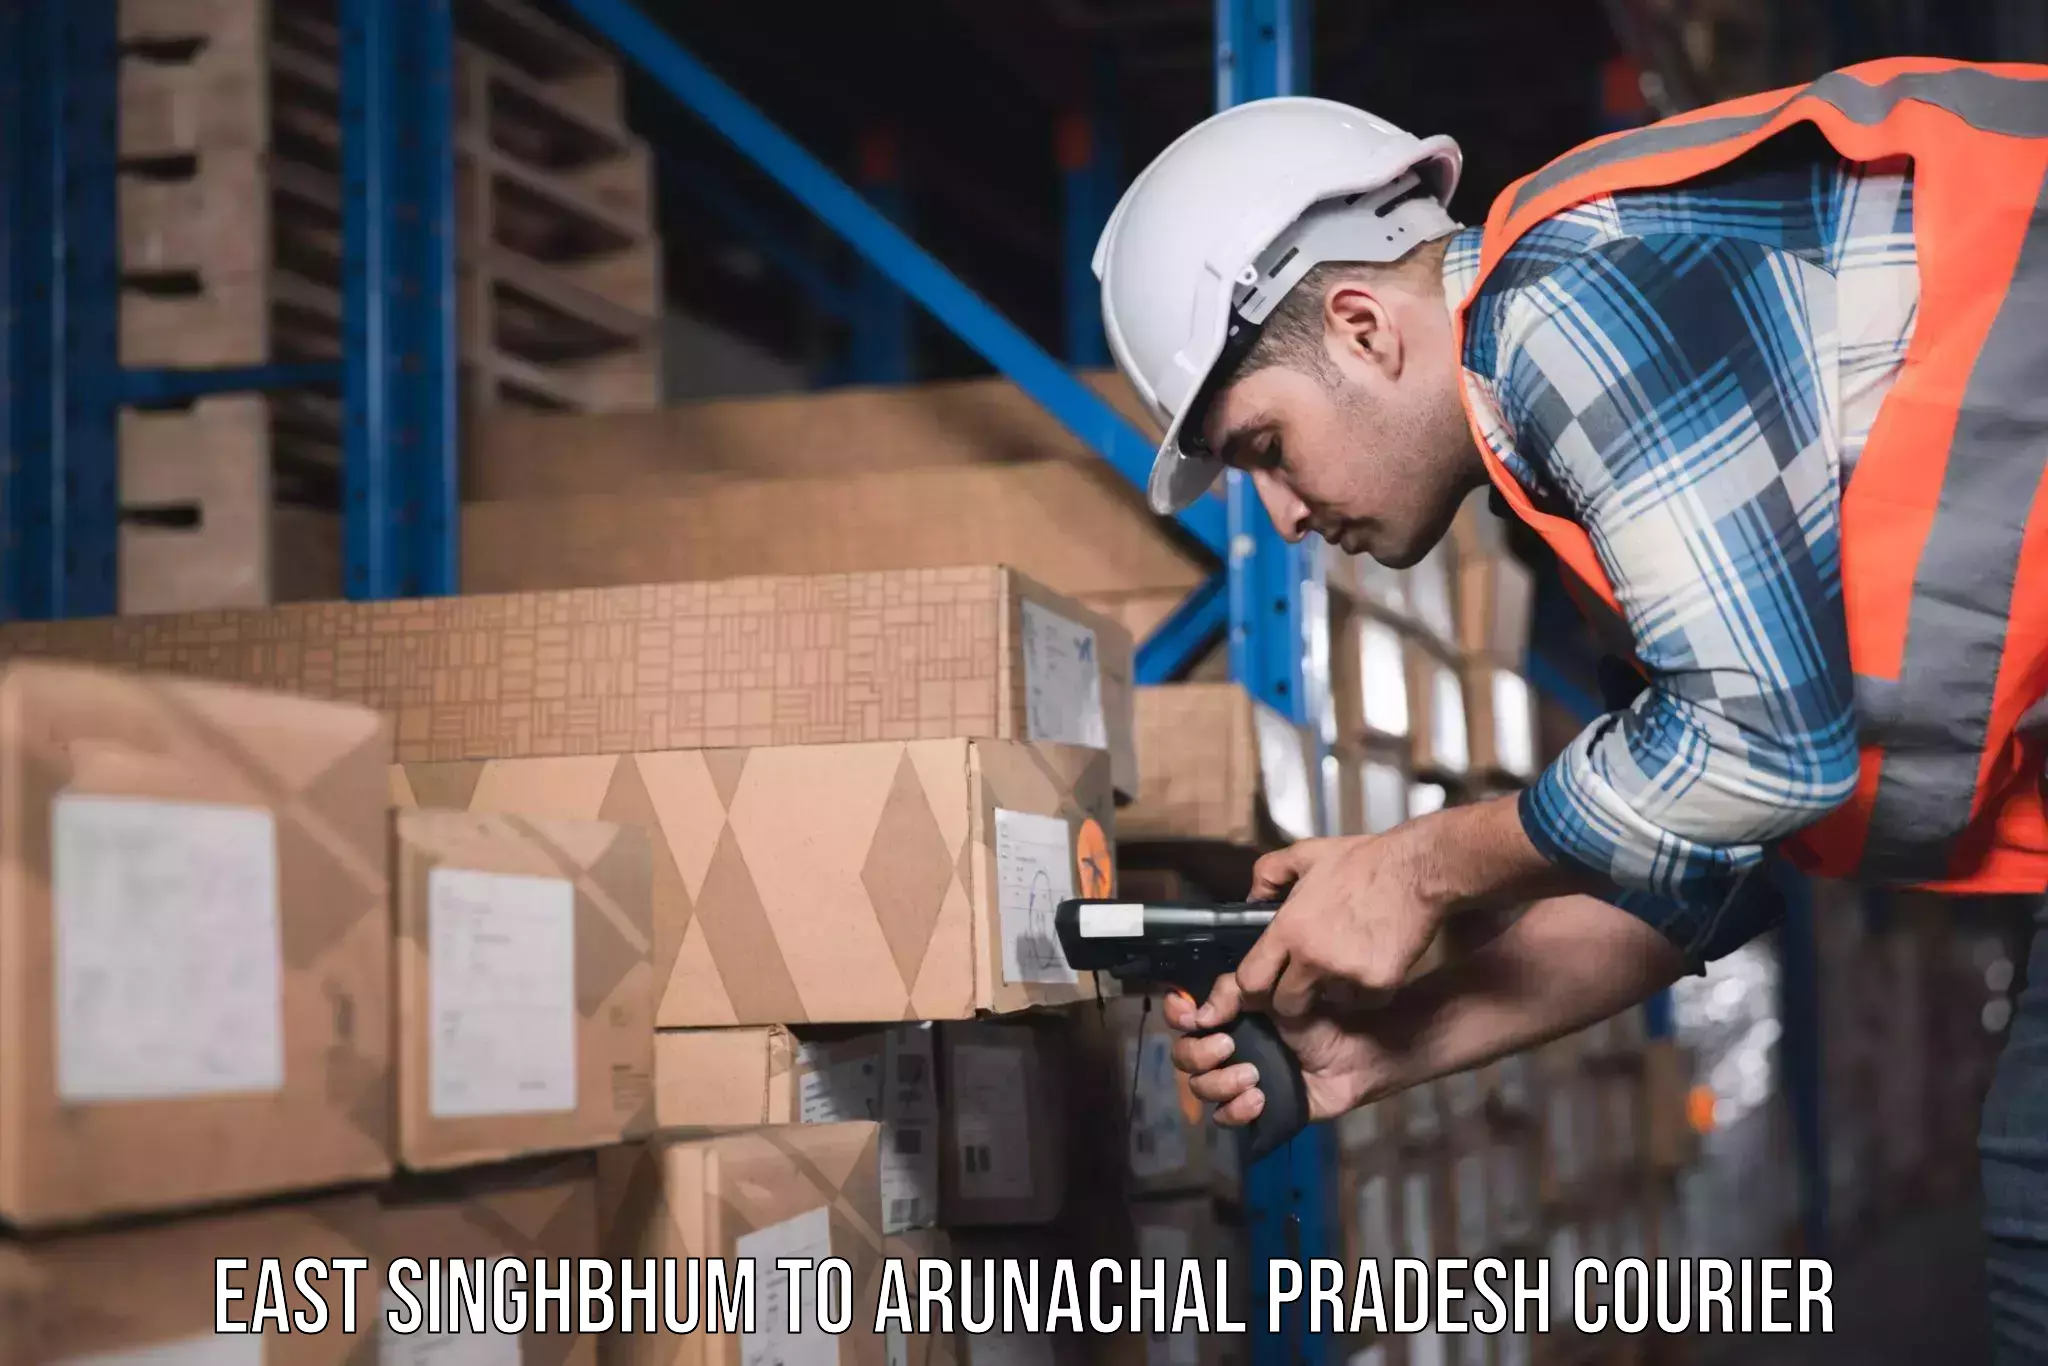 Specialized moving company East Singhbhum to Dibang Valley